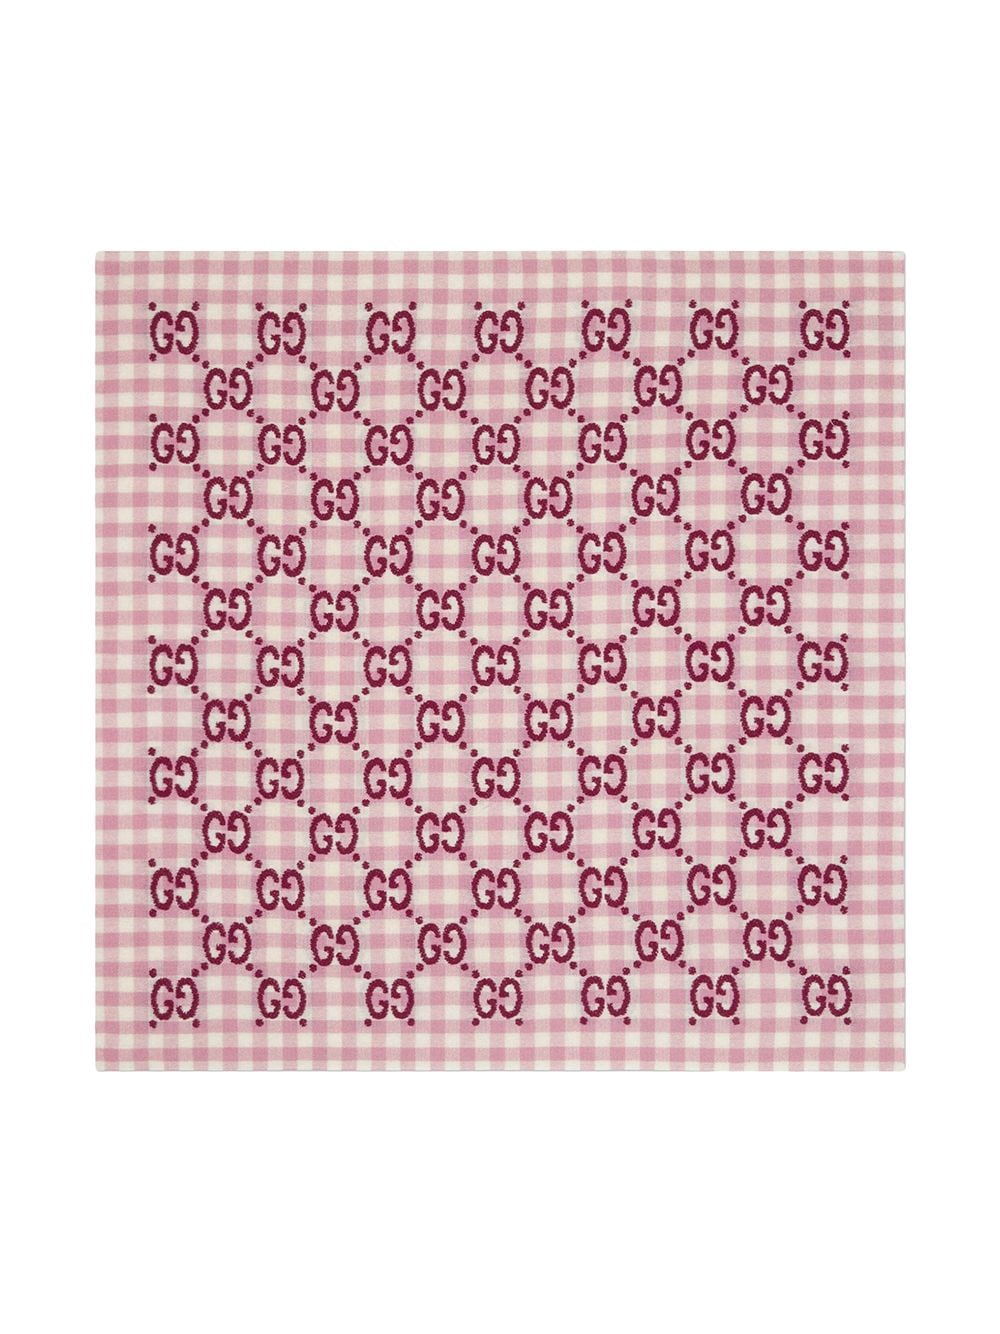 Pink and white wool blanket for newborns